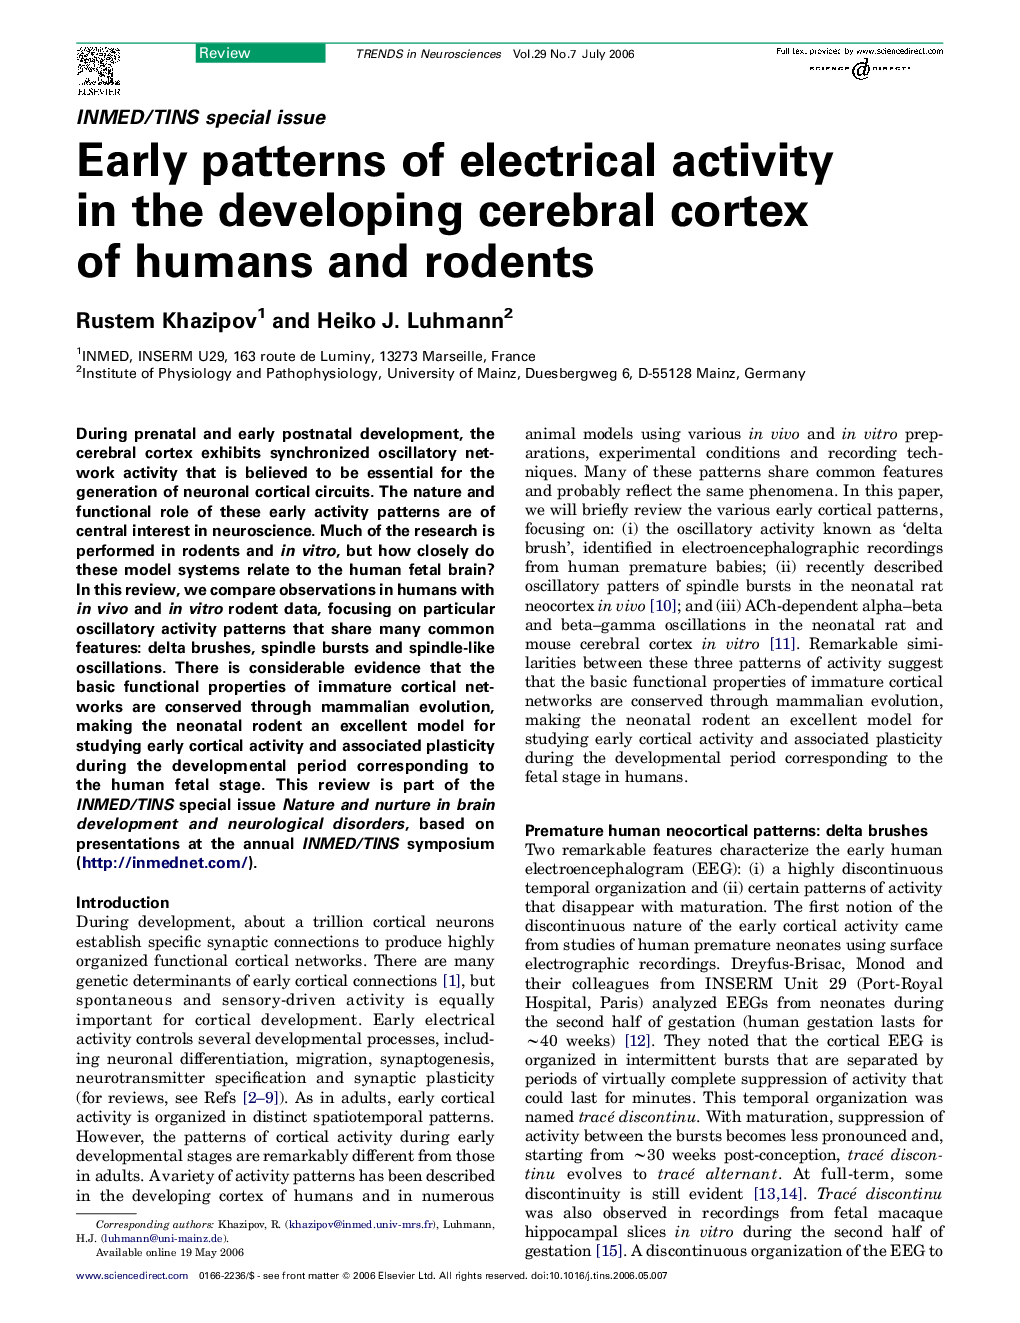 Early patterns of electrical activity in the developing cerebral cortex of humans and rodents